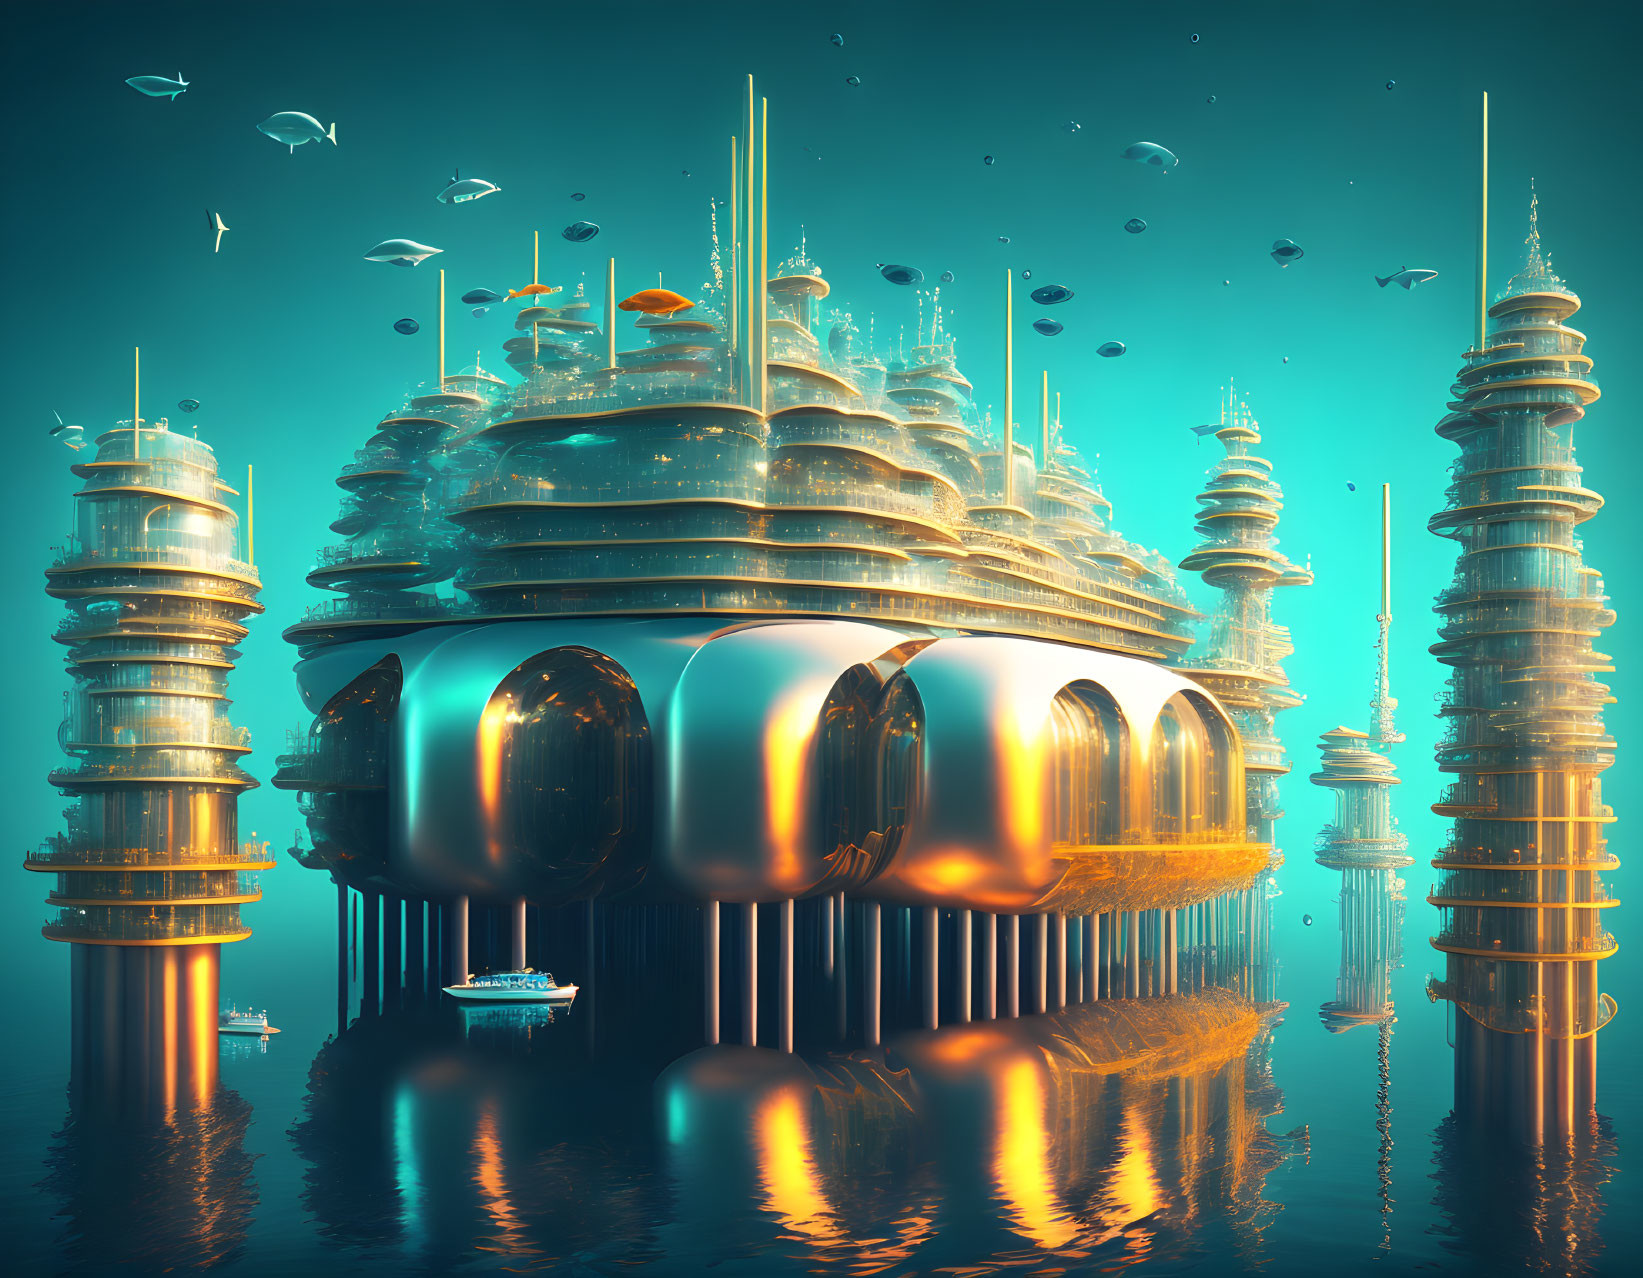 Golden cityscape with towering spires, birds, boats, and teal sky.